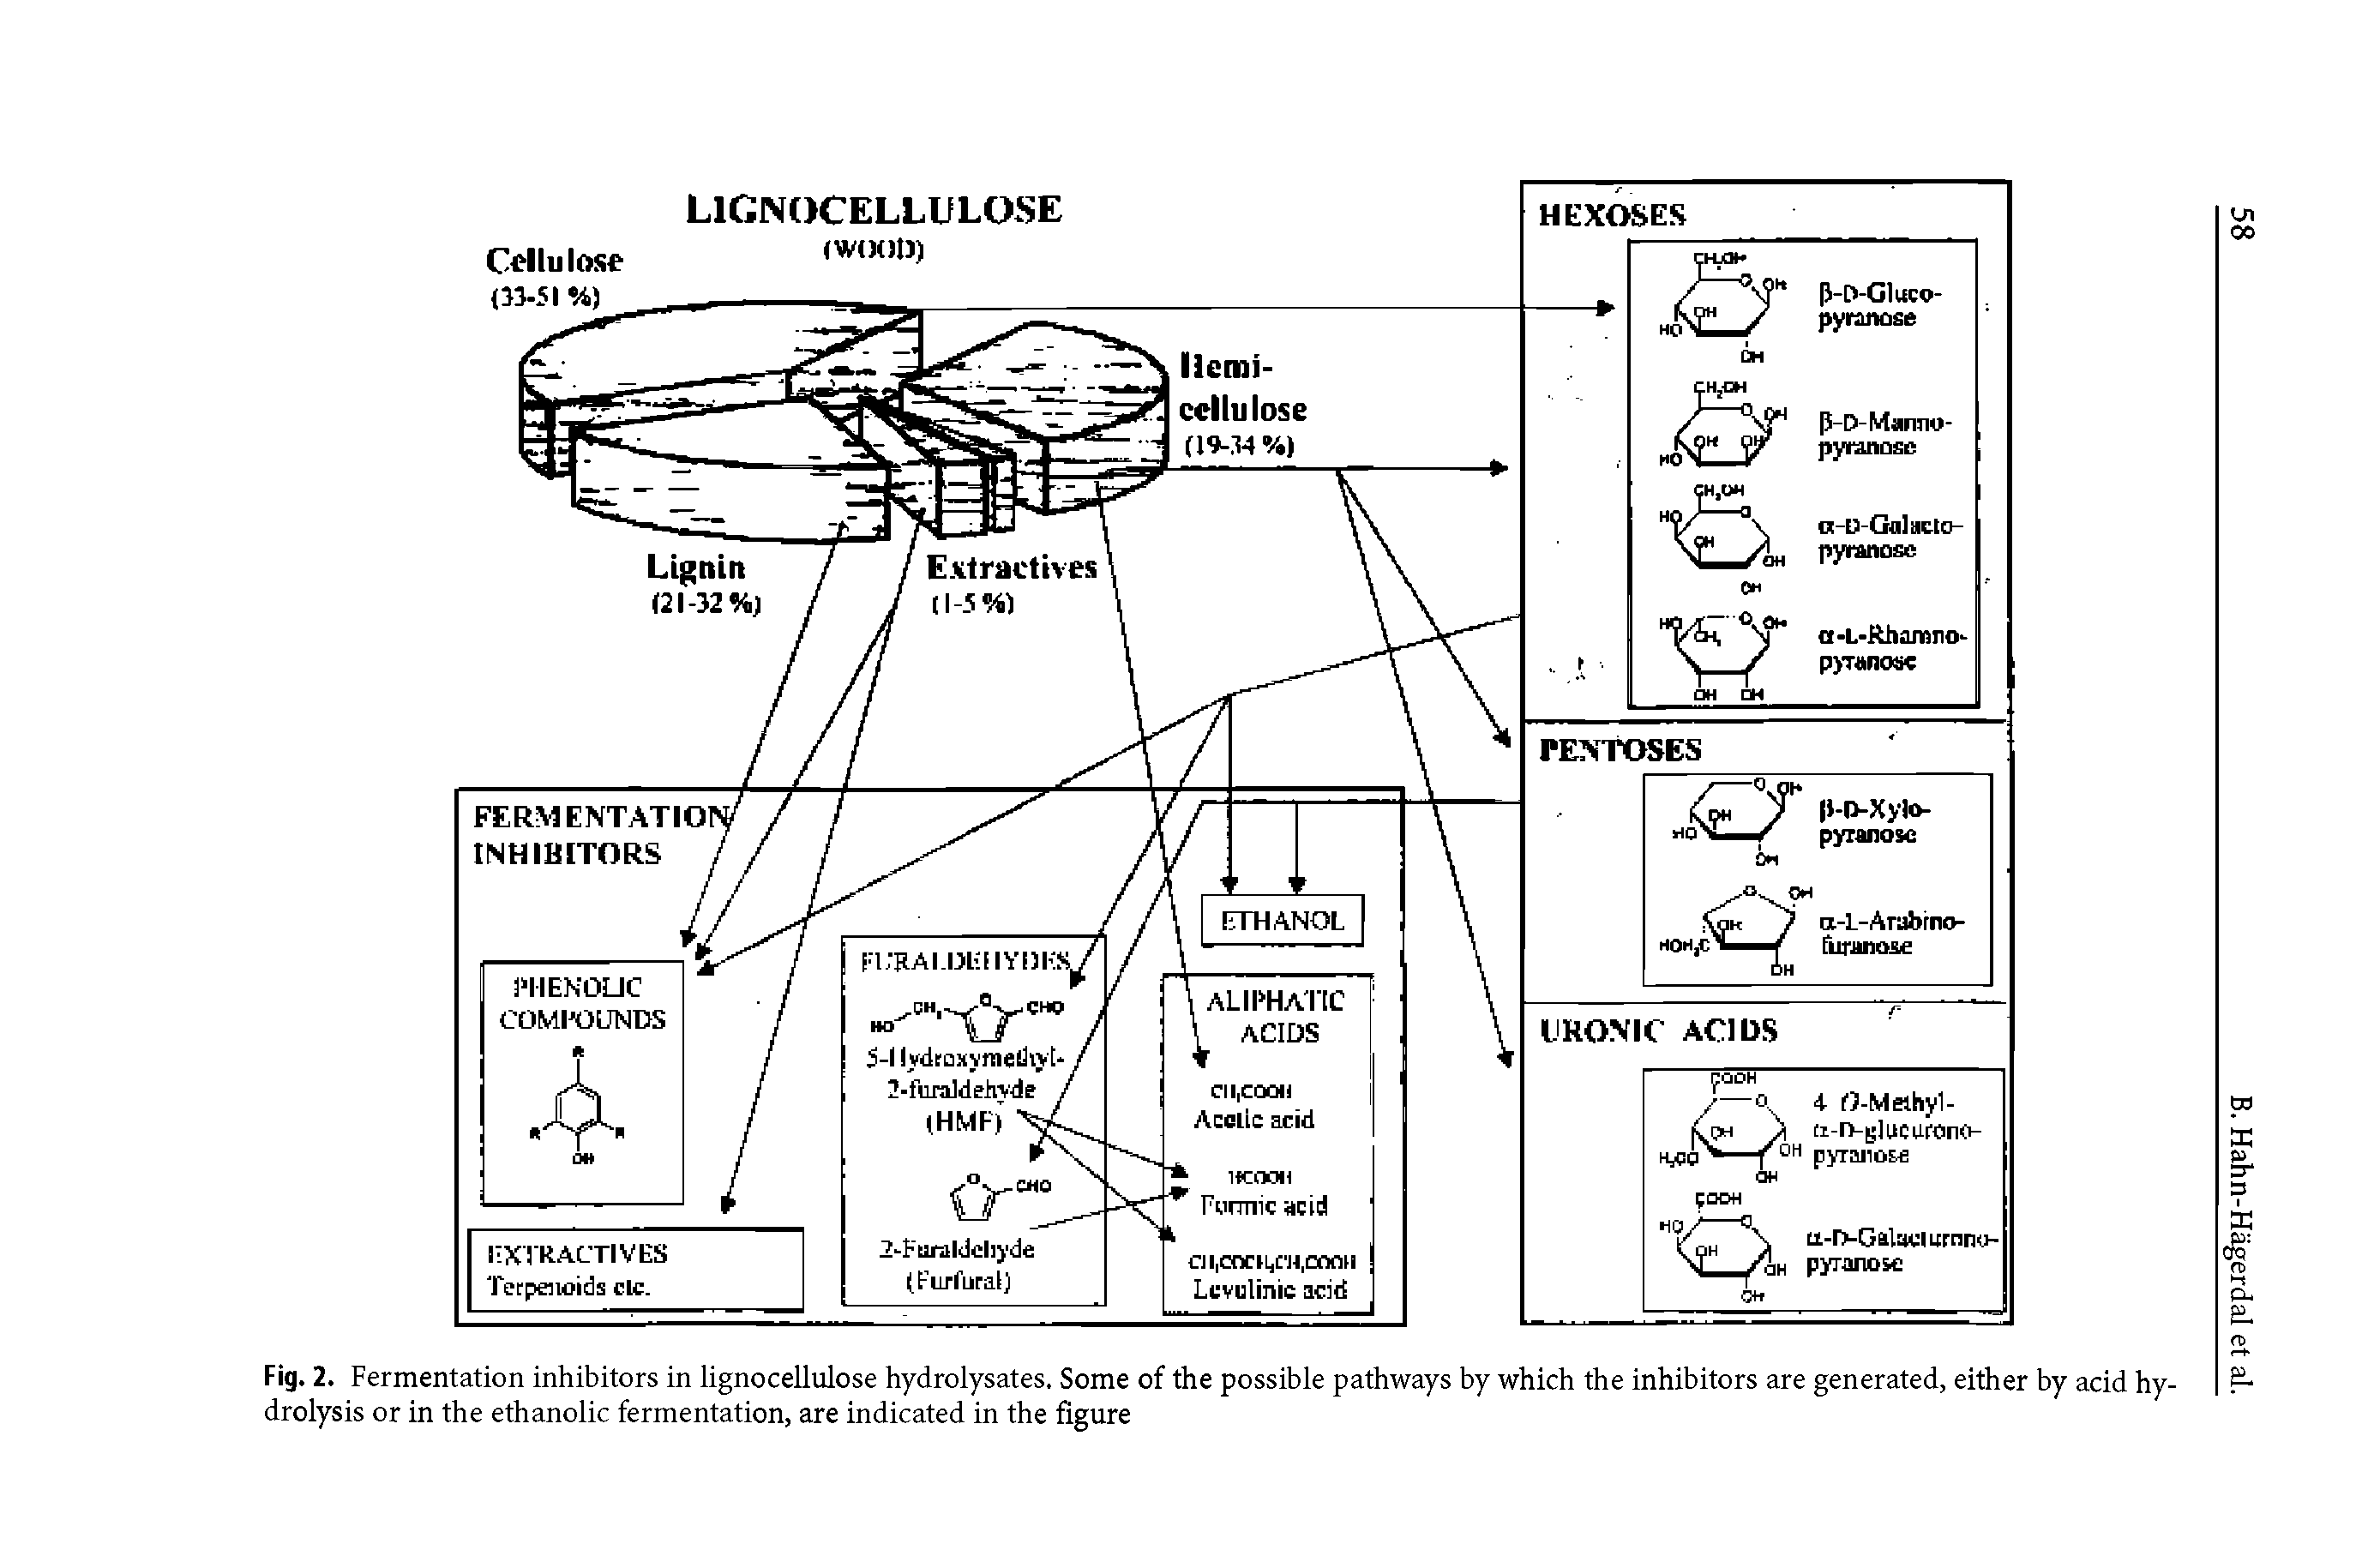 Fig. 2. Fermentation inhibitors in lignocellulose hydrolysates. Some of the possible pathways by which the inhibitors are generated, either by acid hydrolysis or in the ethanolic fermentation, are indicated in the figure...